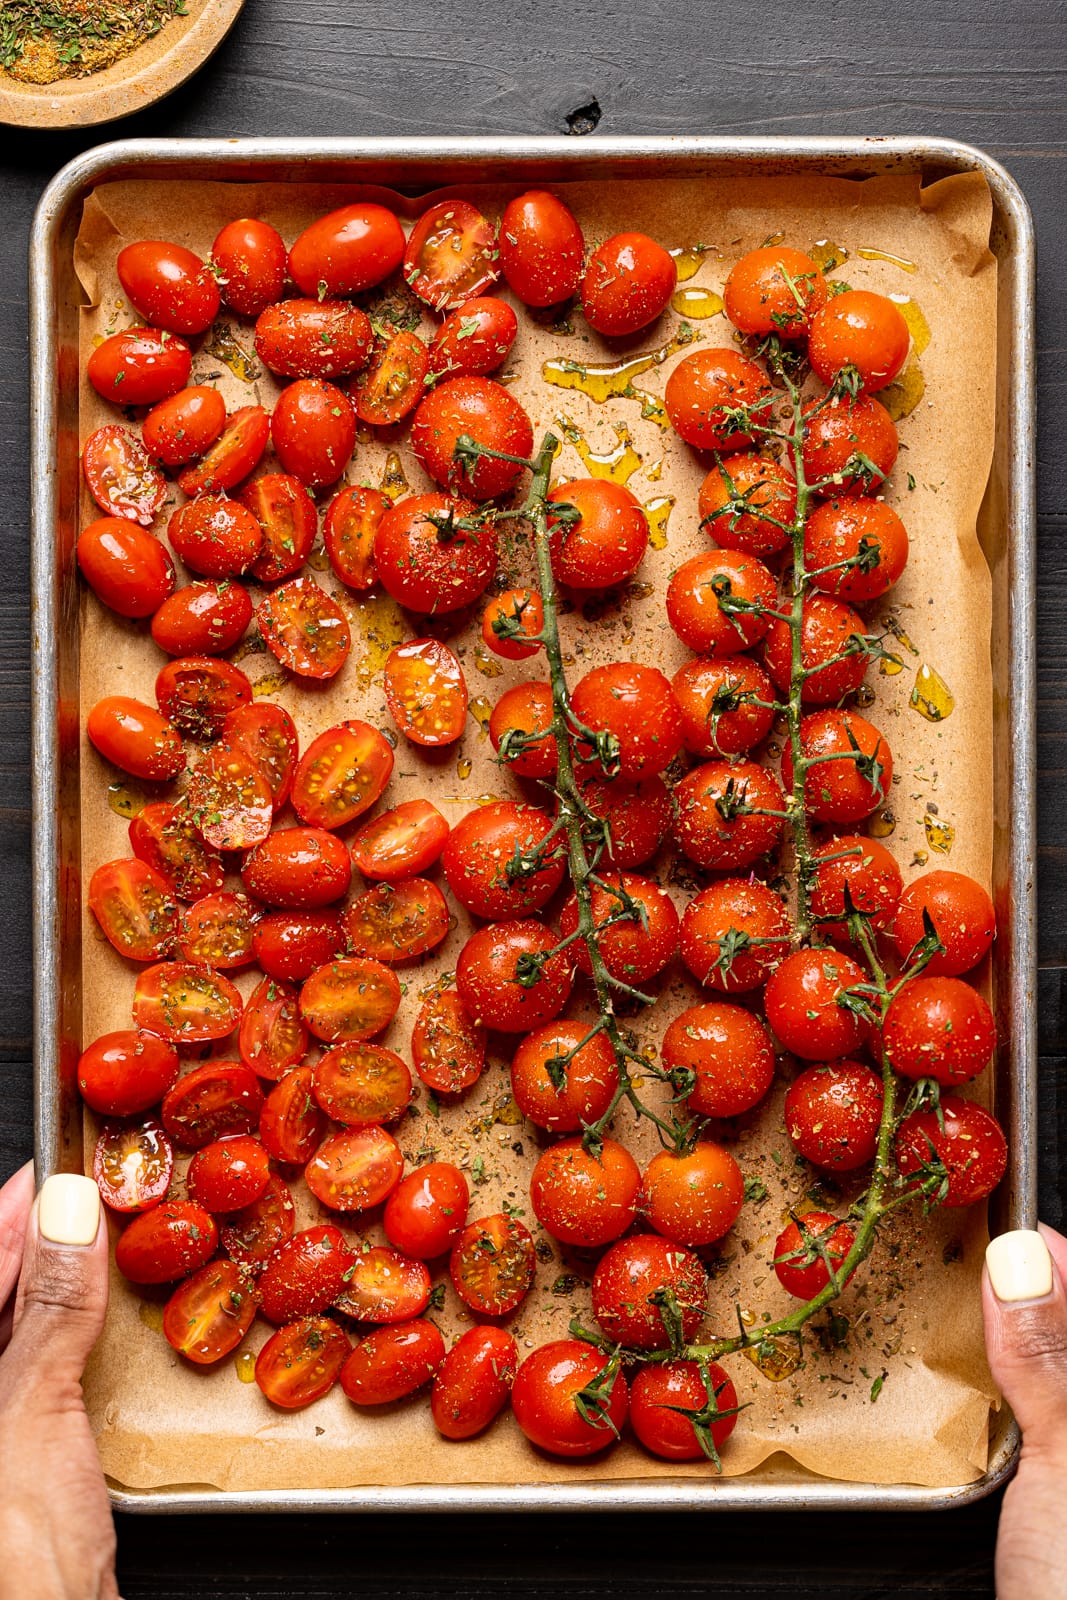 Tomatoes on a baking sheet lined with parchment paper, seasoned and drizzled with olive oil.